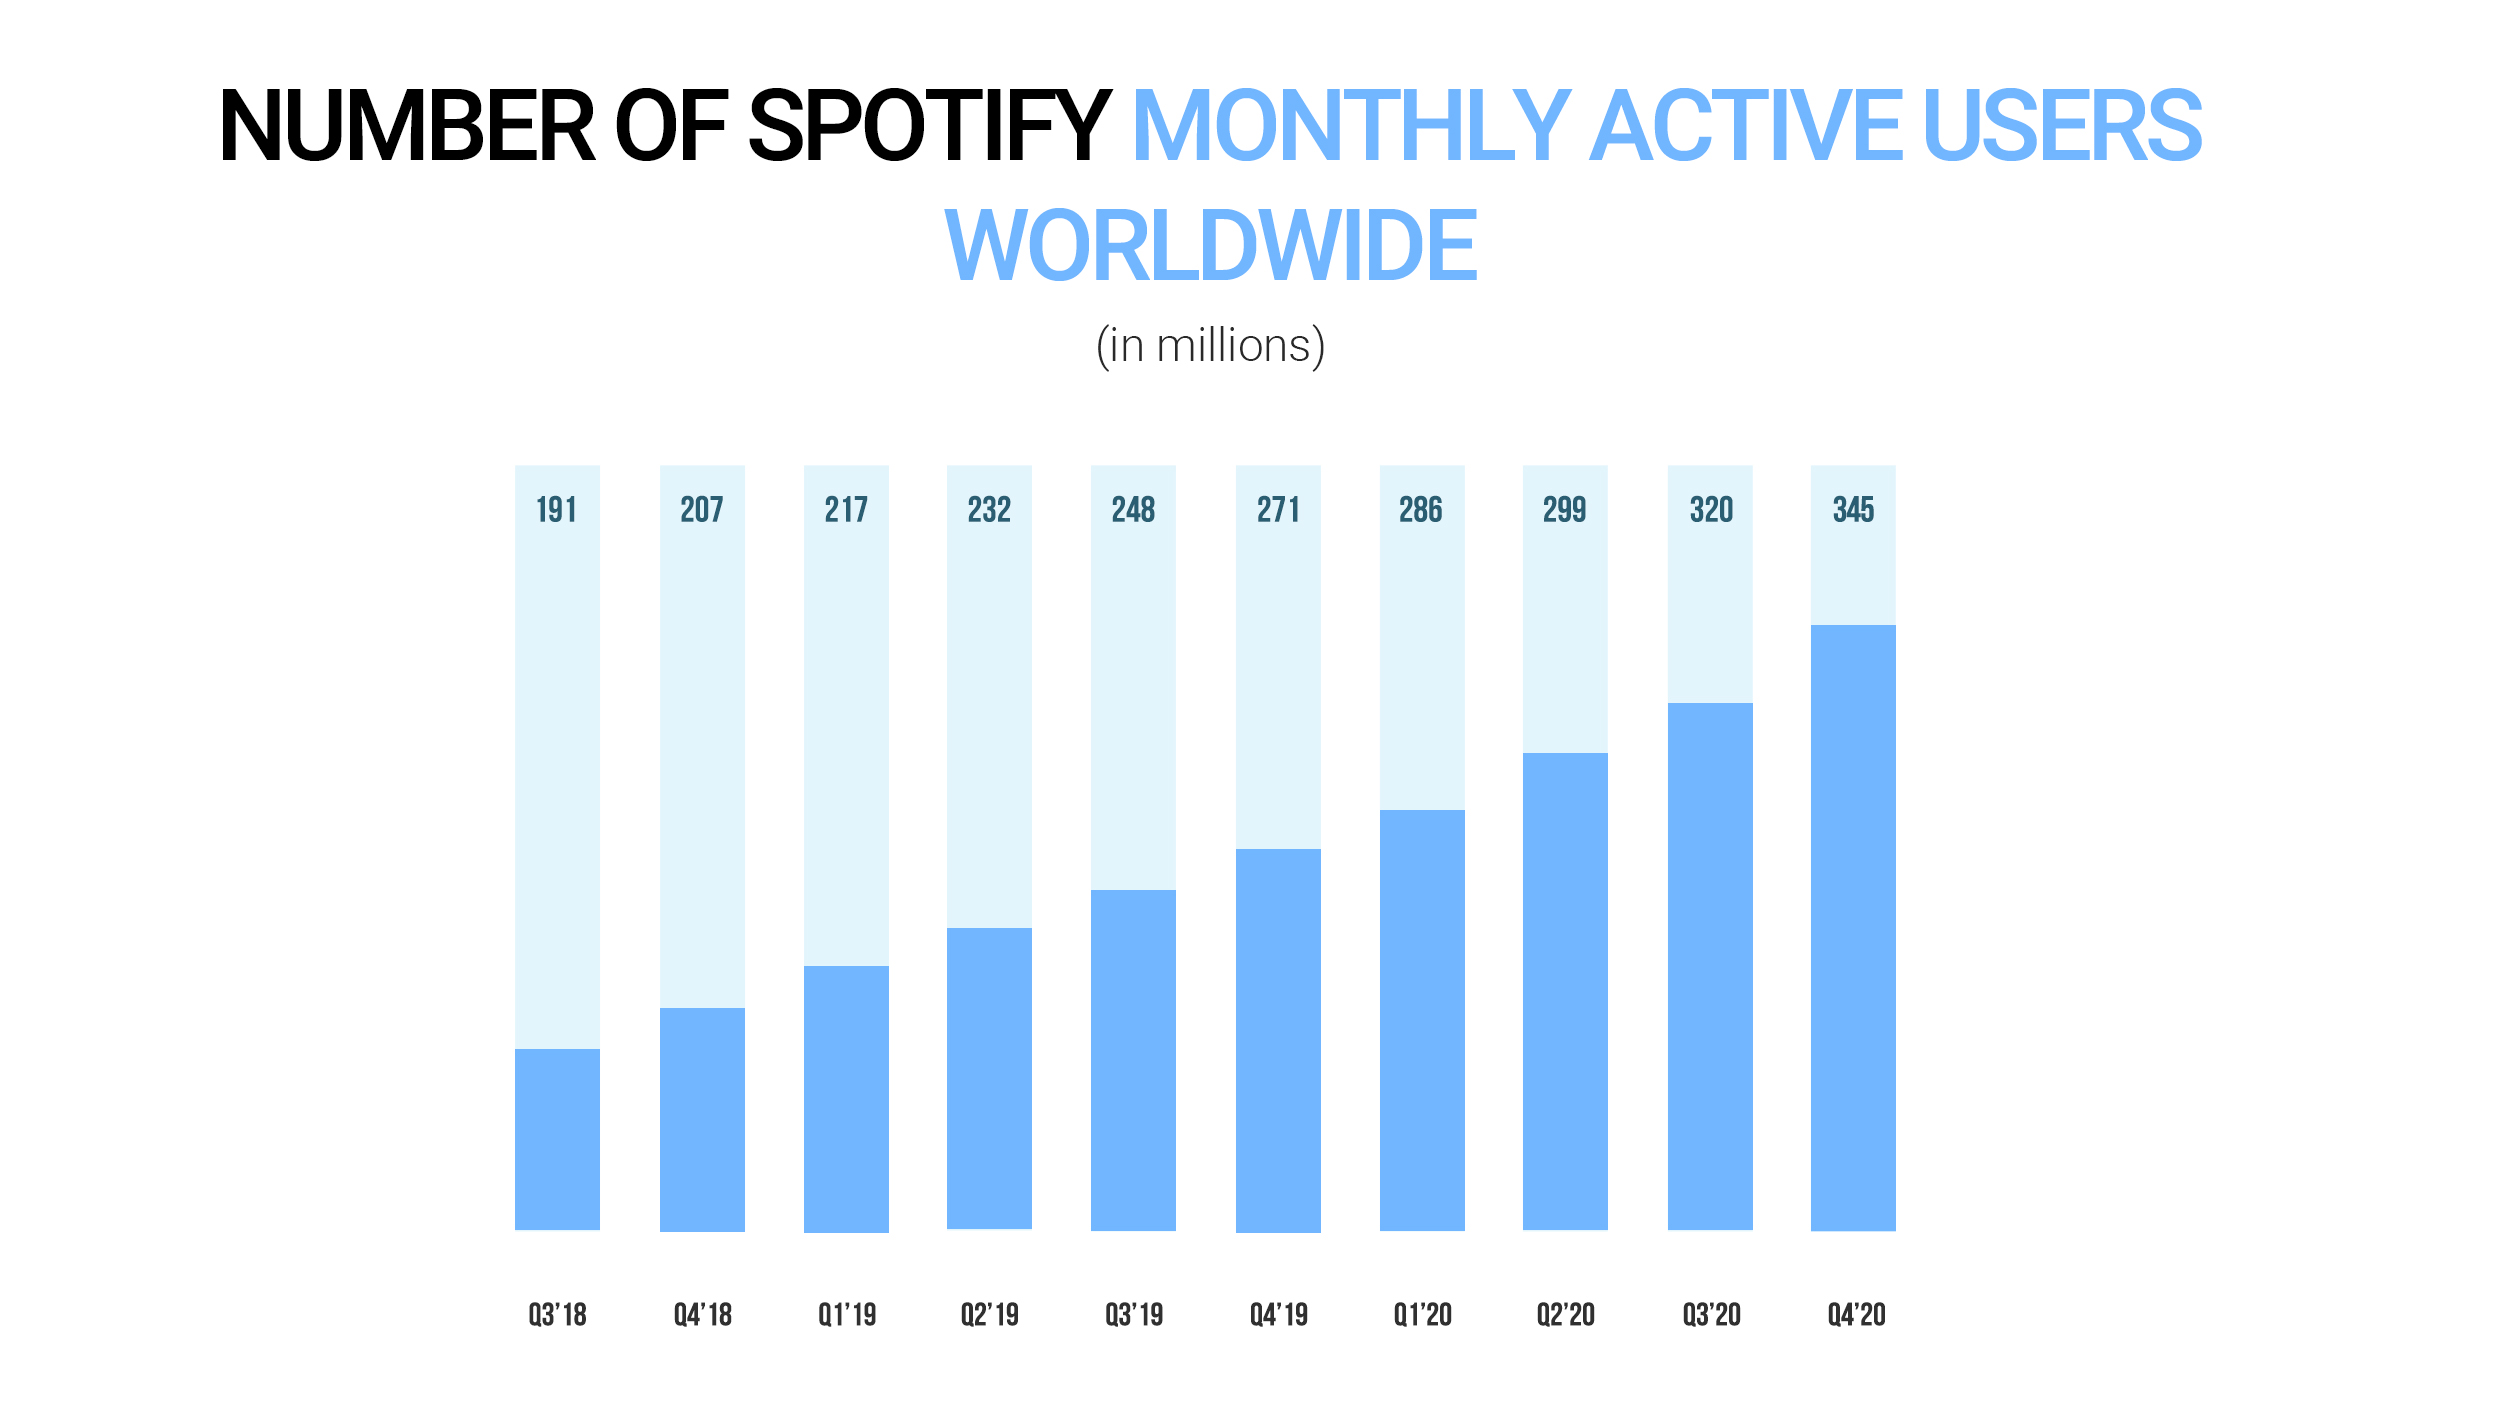 Number of Spotify monthly active users worldwide